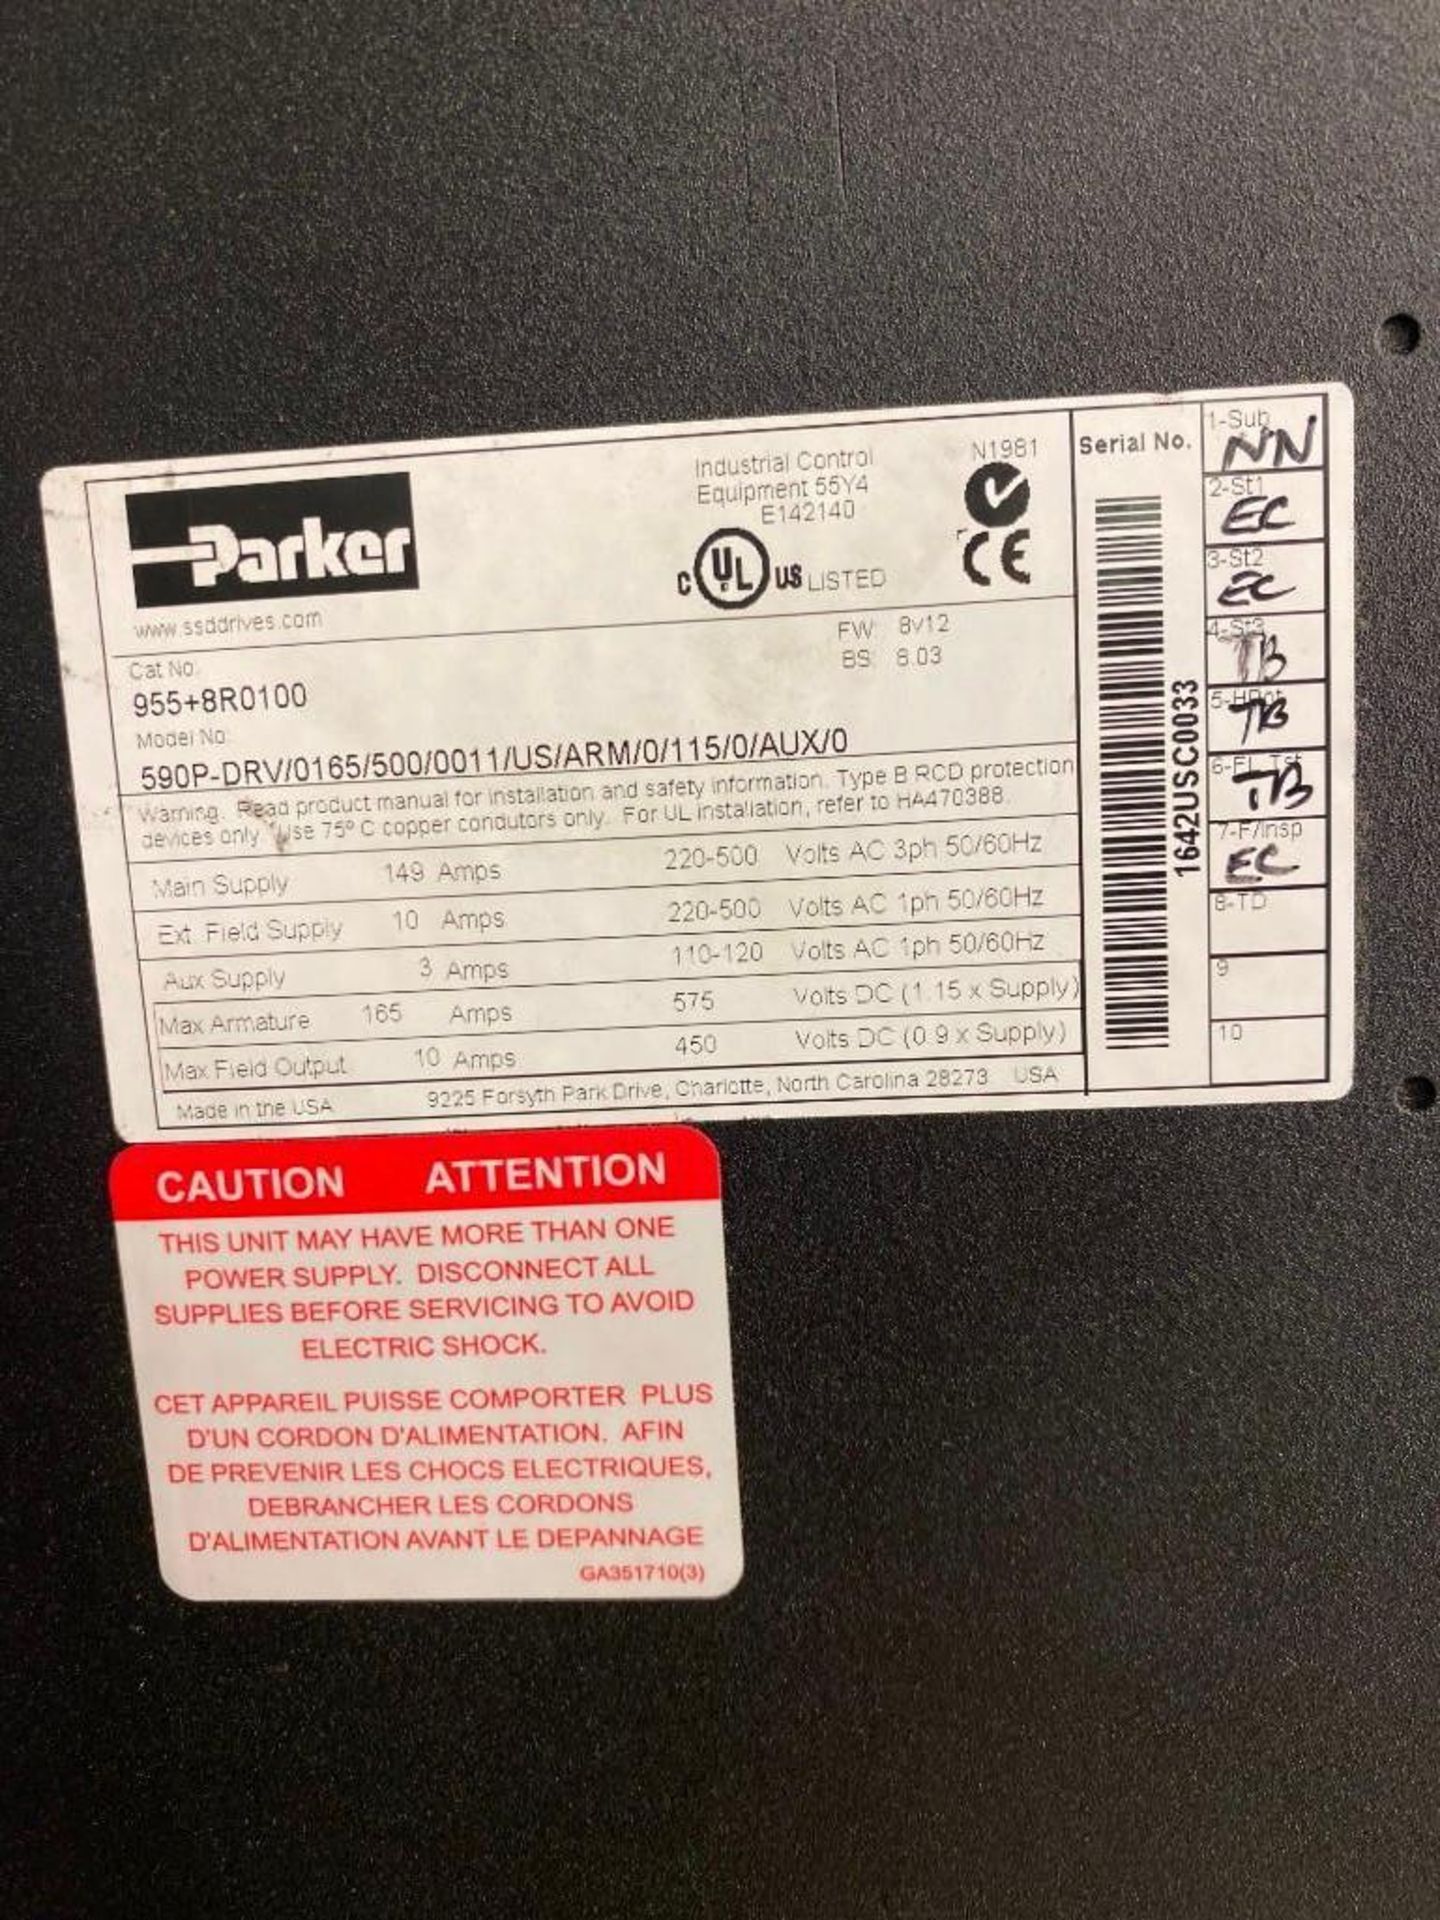 1 USED SPARE PARKER 955+8R0100 - Image 4 of 4